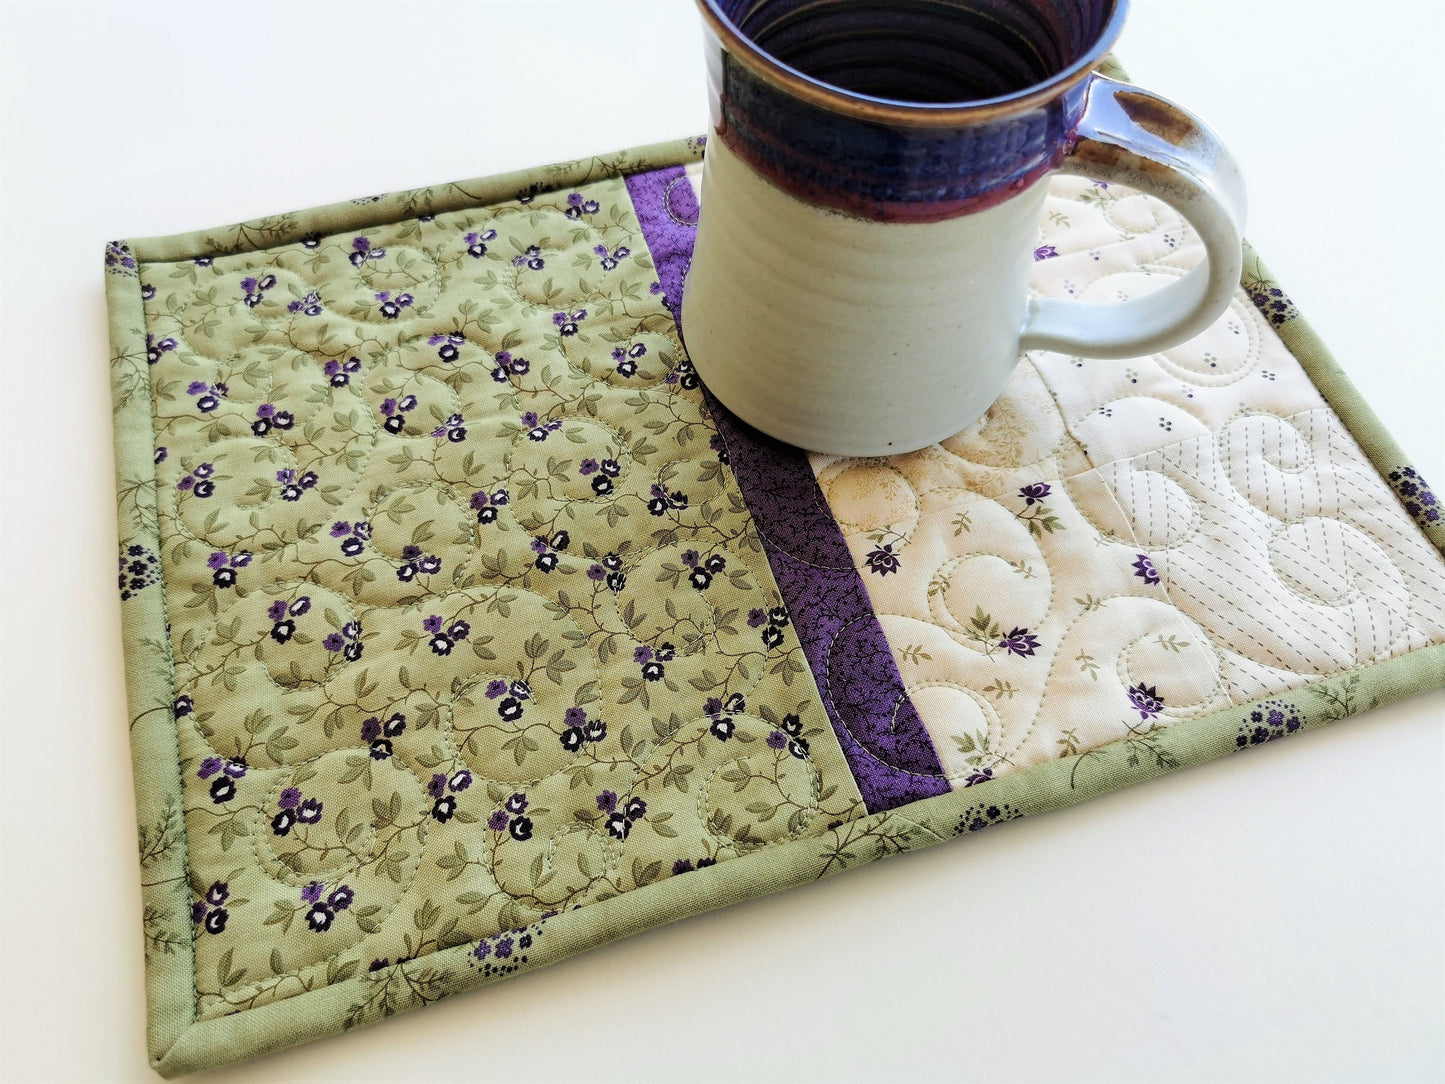 the quilted mug rug is shown with a pottery mug sitting on it, showing scale. Quality cotton fabrics are lovely spring green with purple flowers.